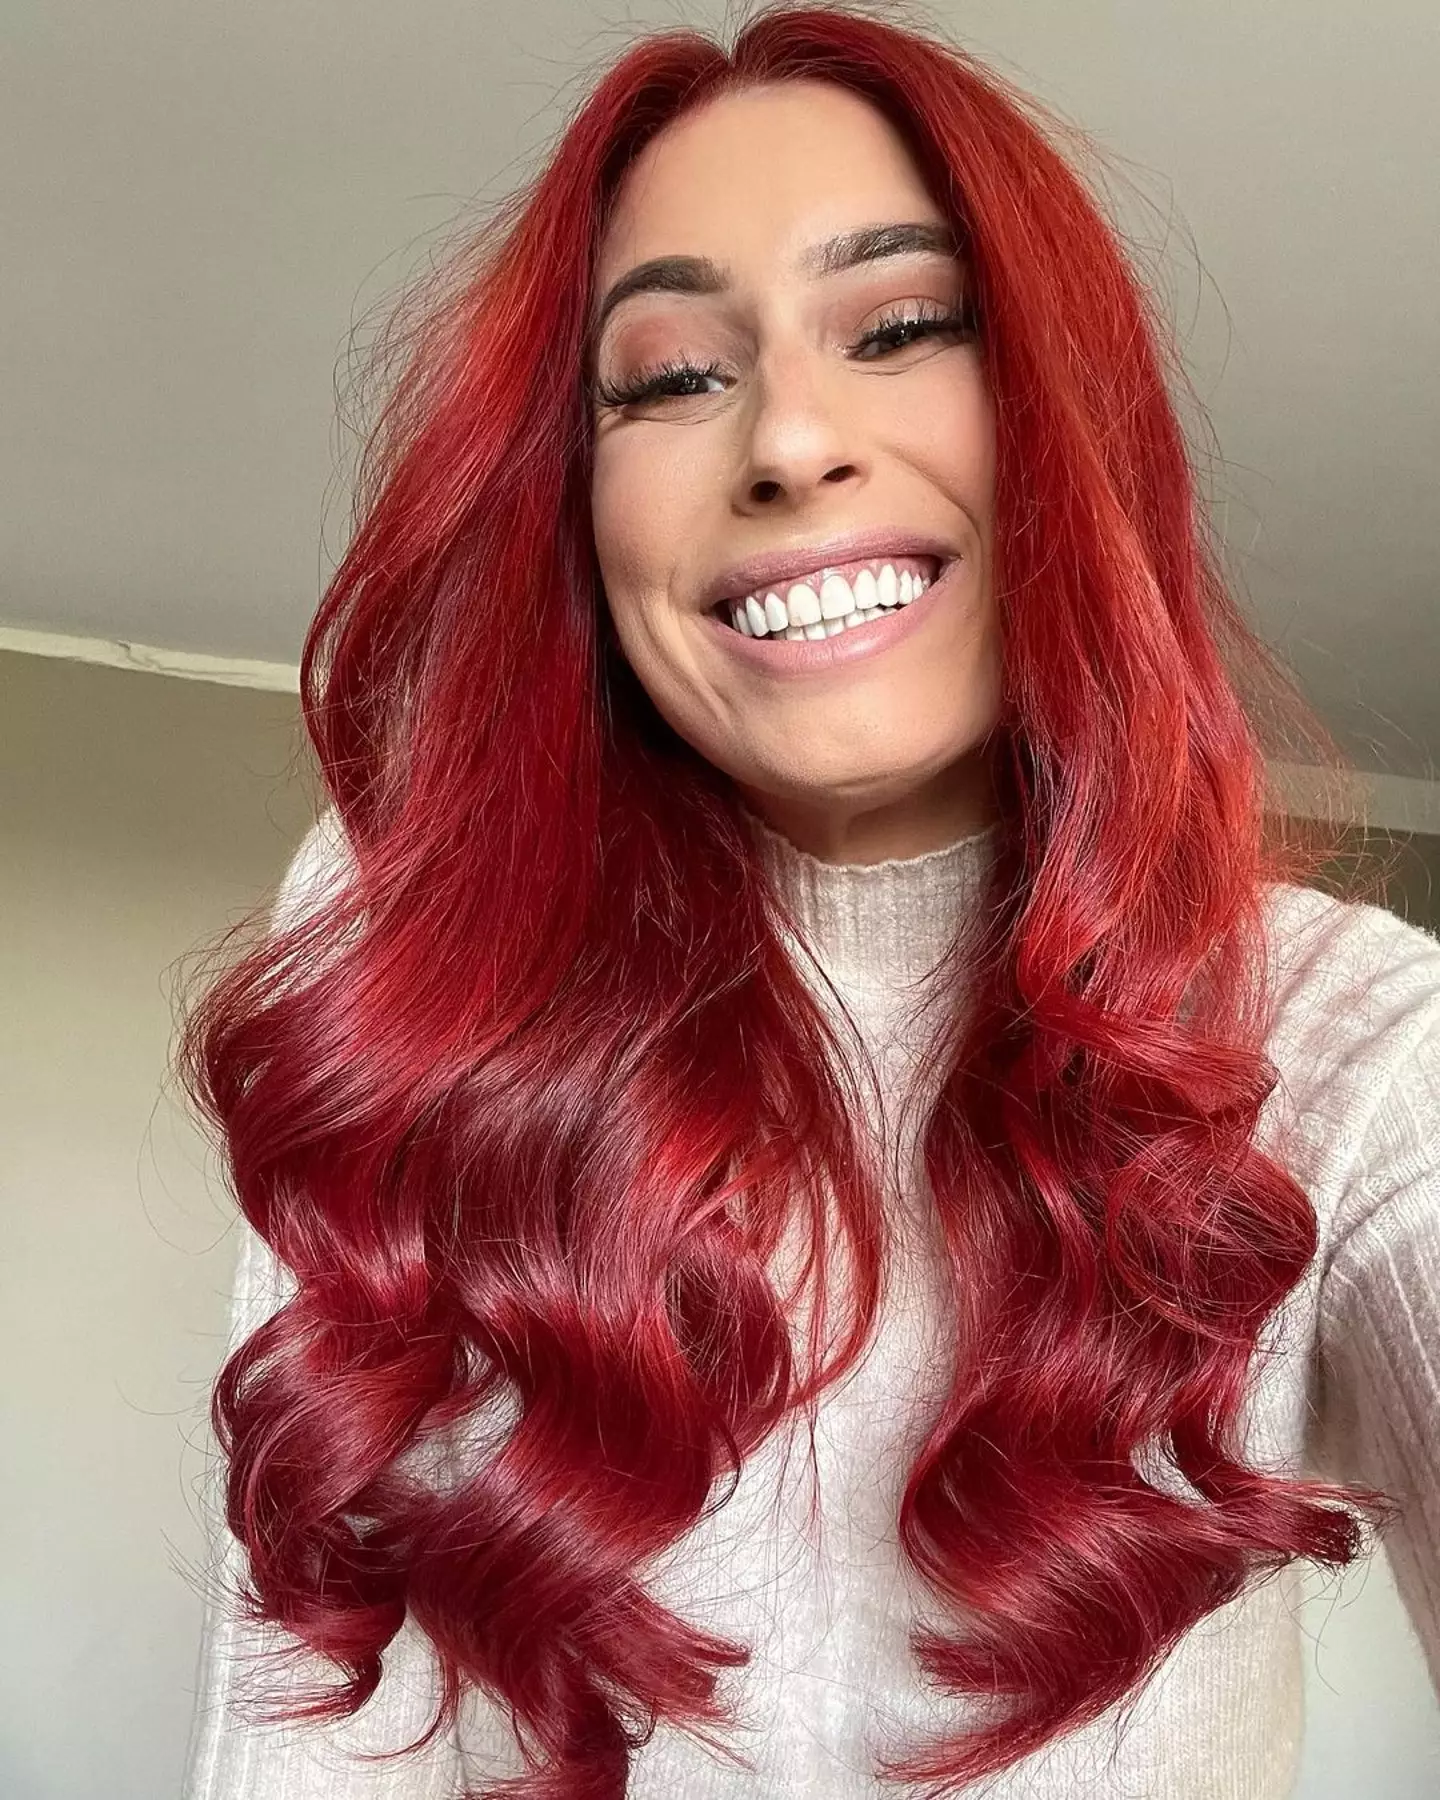 Stacey's fans compared her new 'do to Ariel from The Little Mermaid (